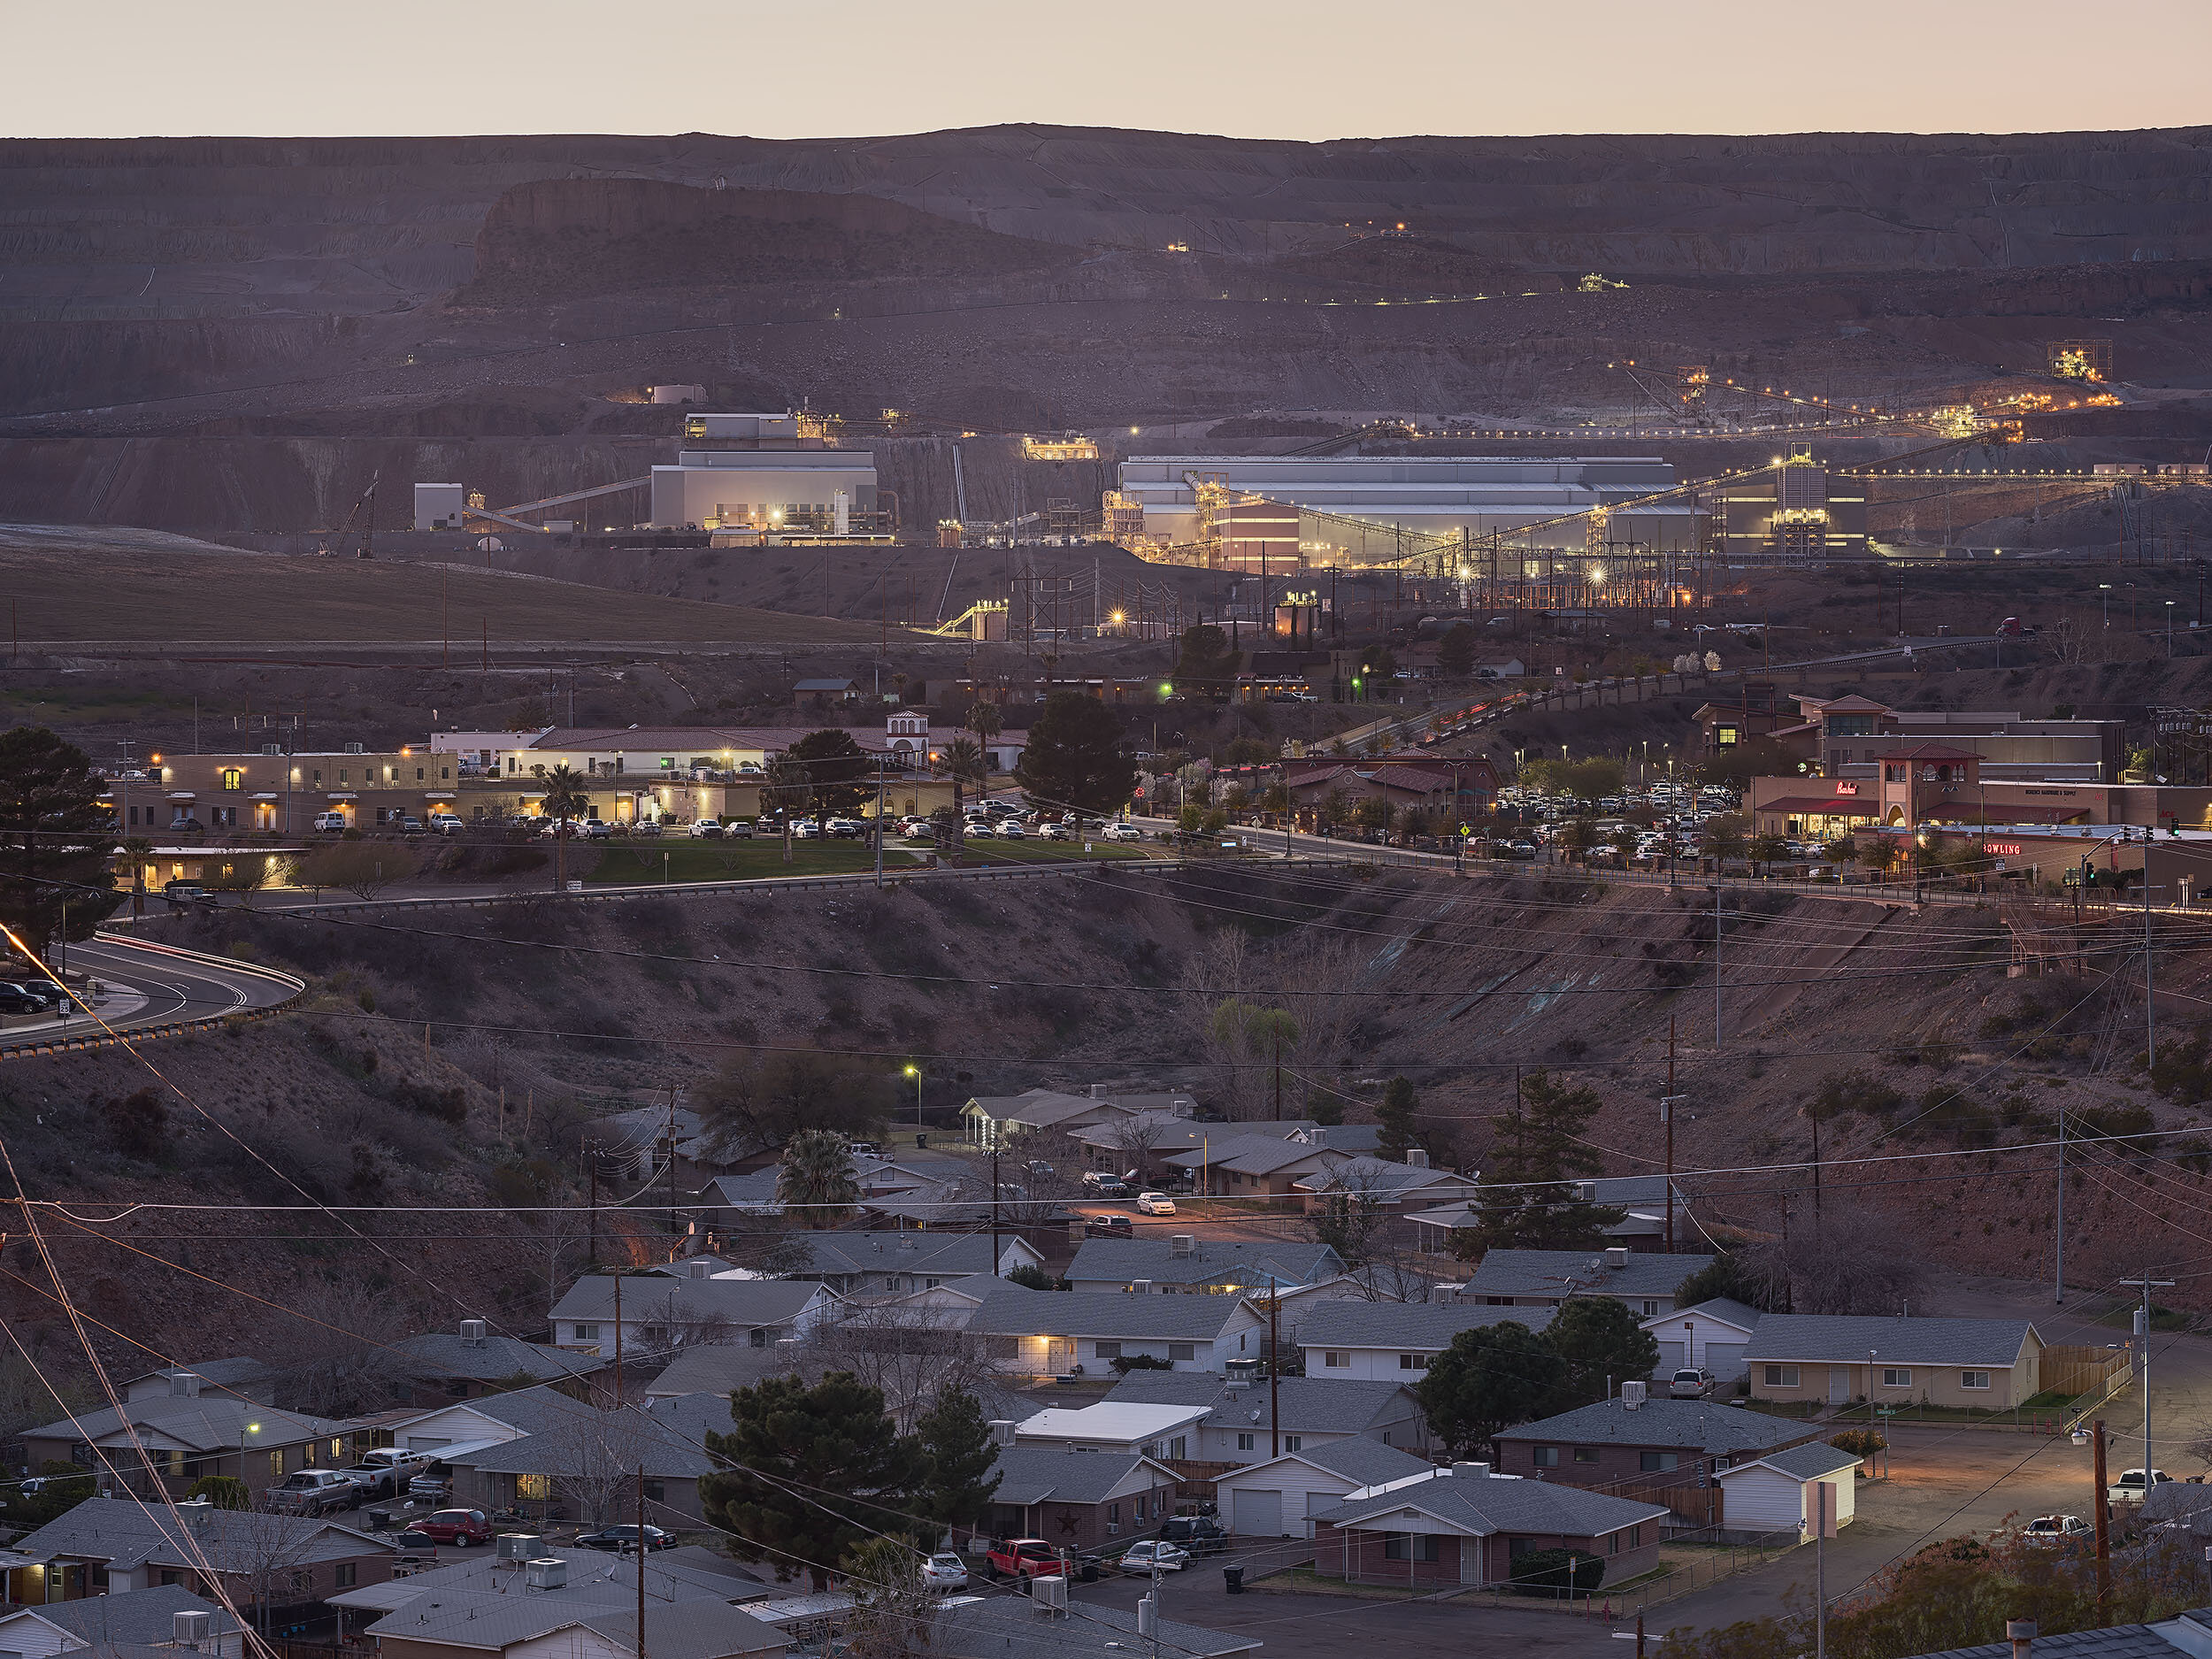  Morenci layers. Mine operations on top. Commercial sector with a supermarket, motel, and bowling alley in the middle. "Down in the hole" section of Freeport-McMoran Morenci Housing below.  